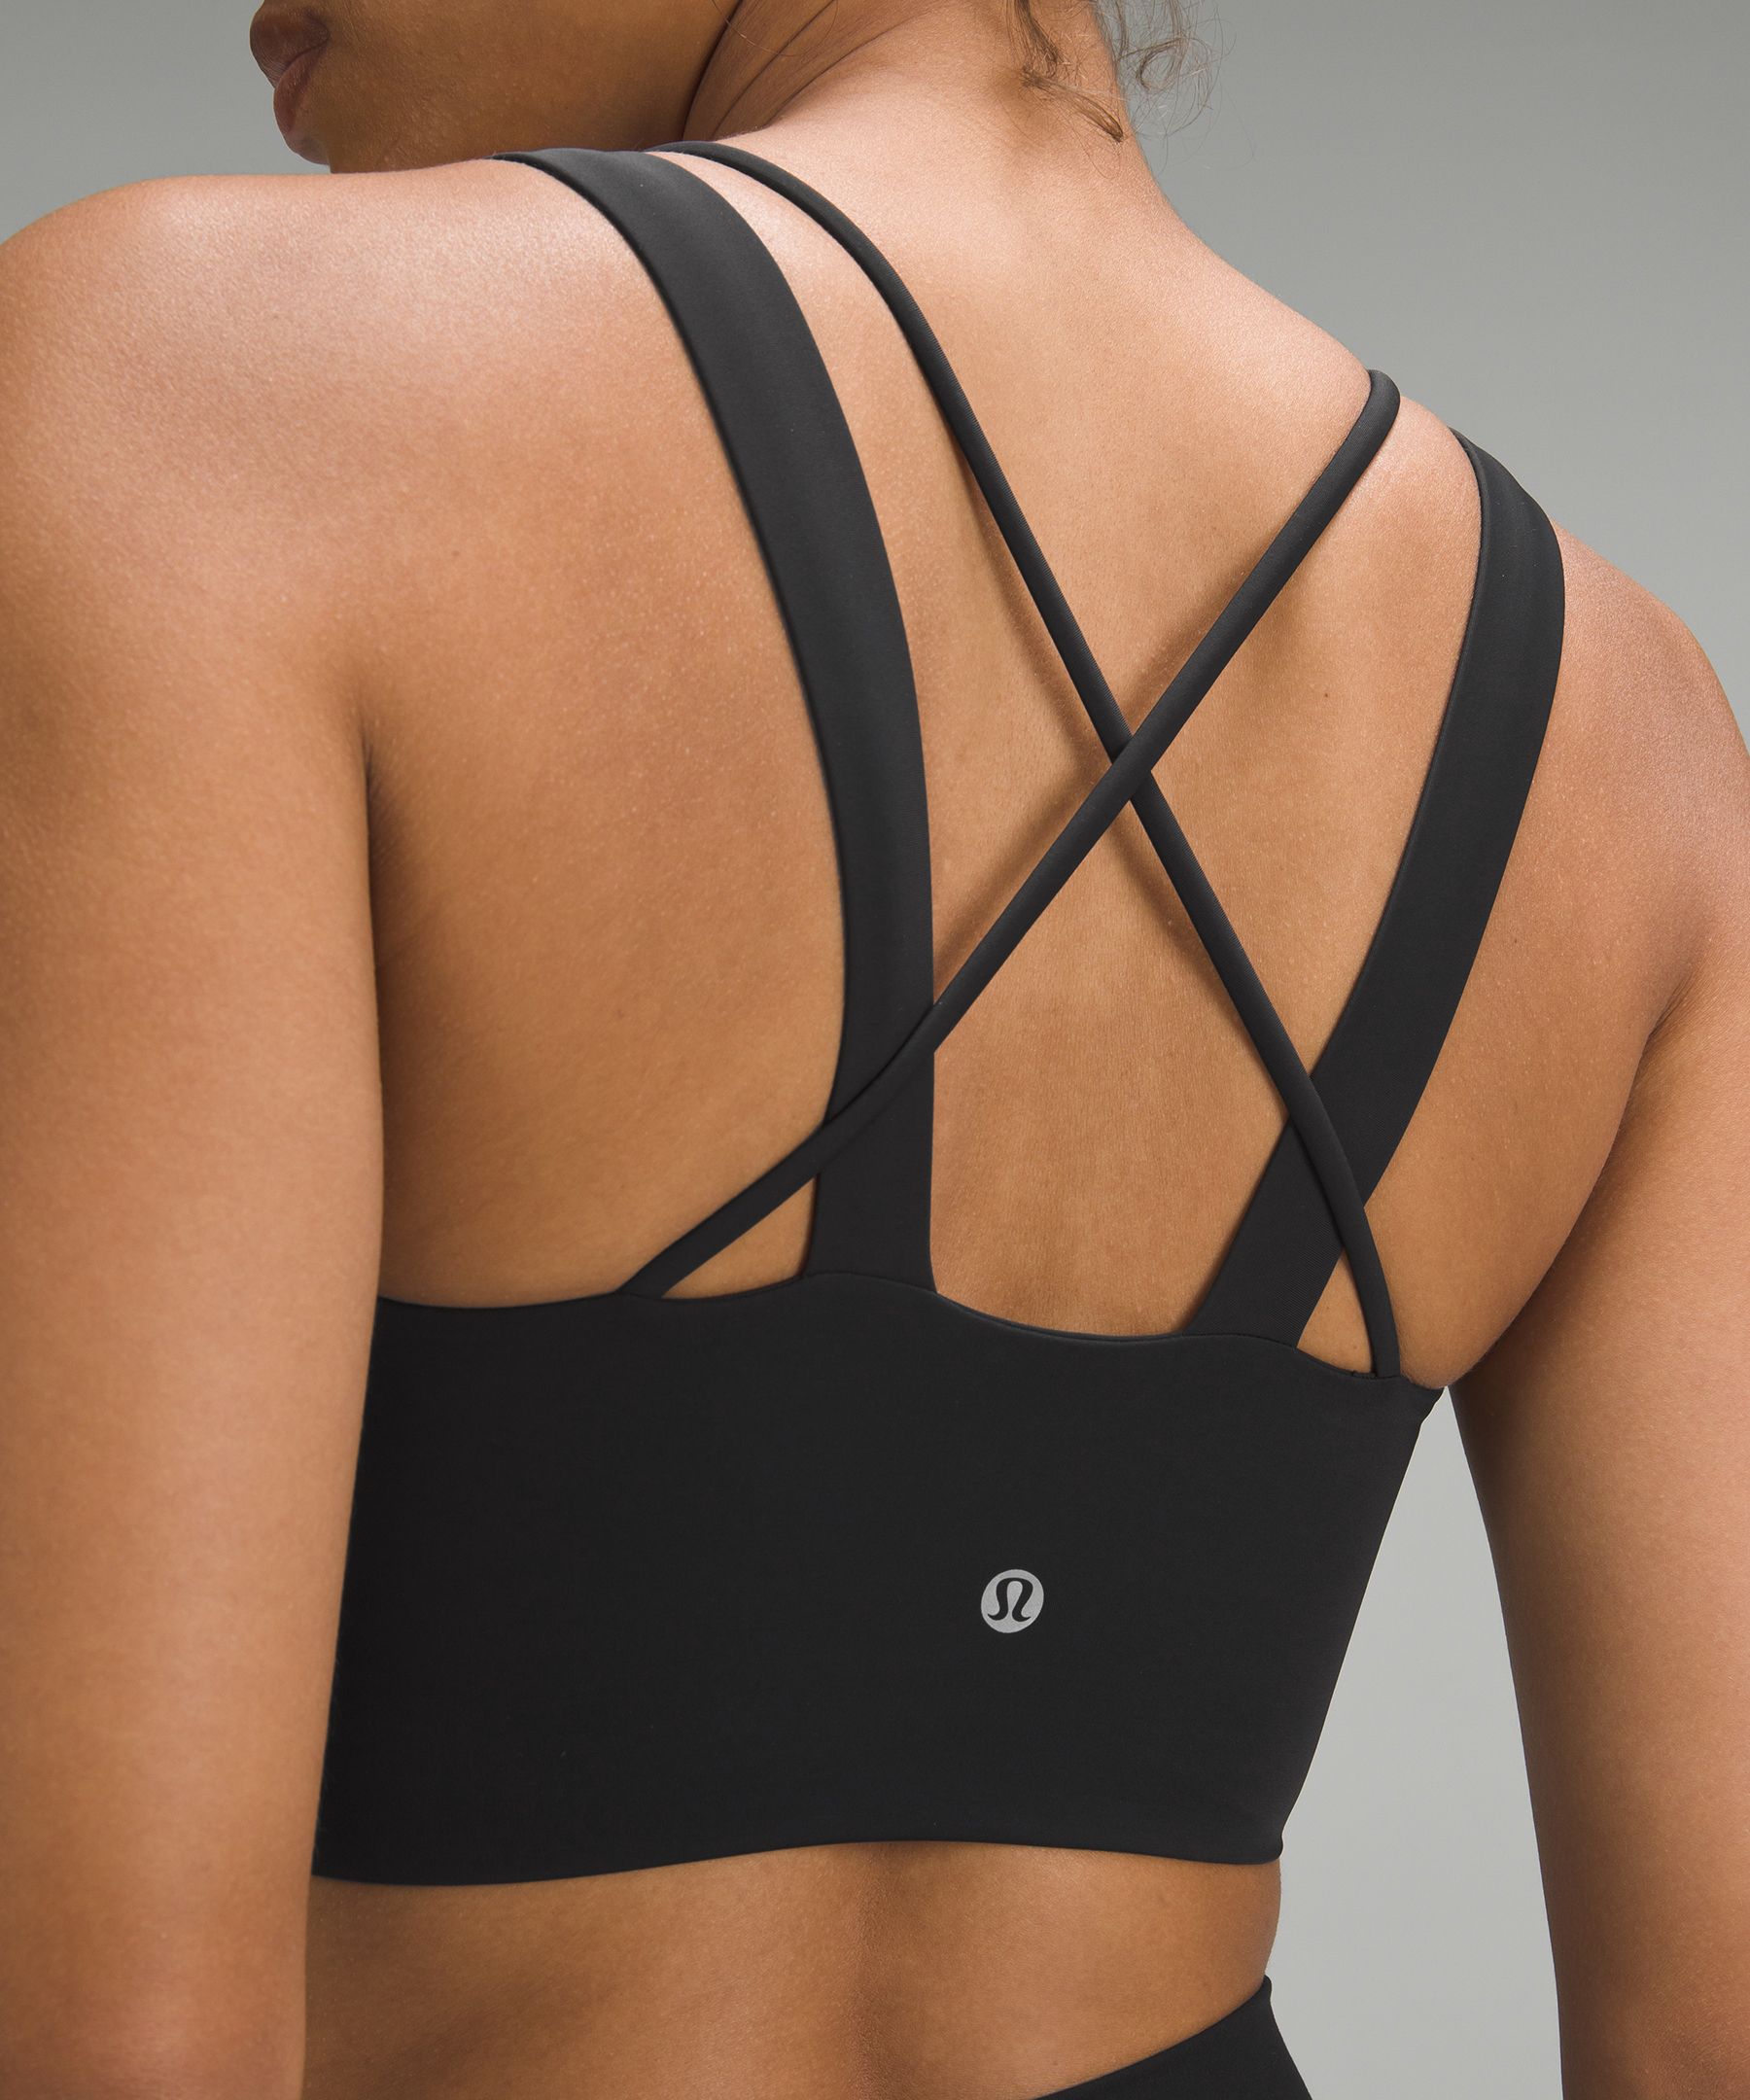 Lululemon Like a Cloud Sports Bra Look for Less from Aerie  Summer outfits  women, Casual summer outfit, Women's athletic wear